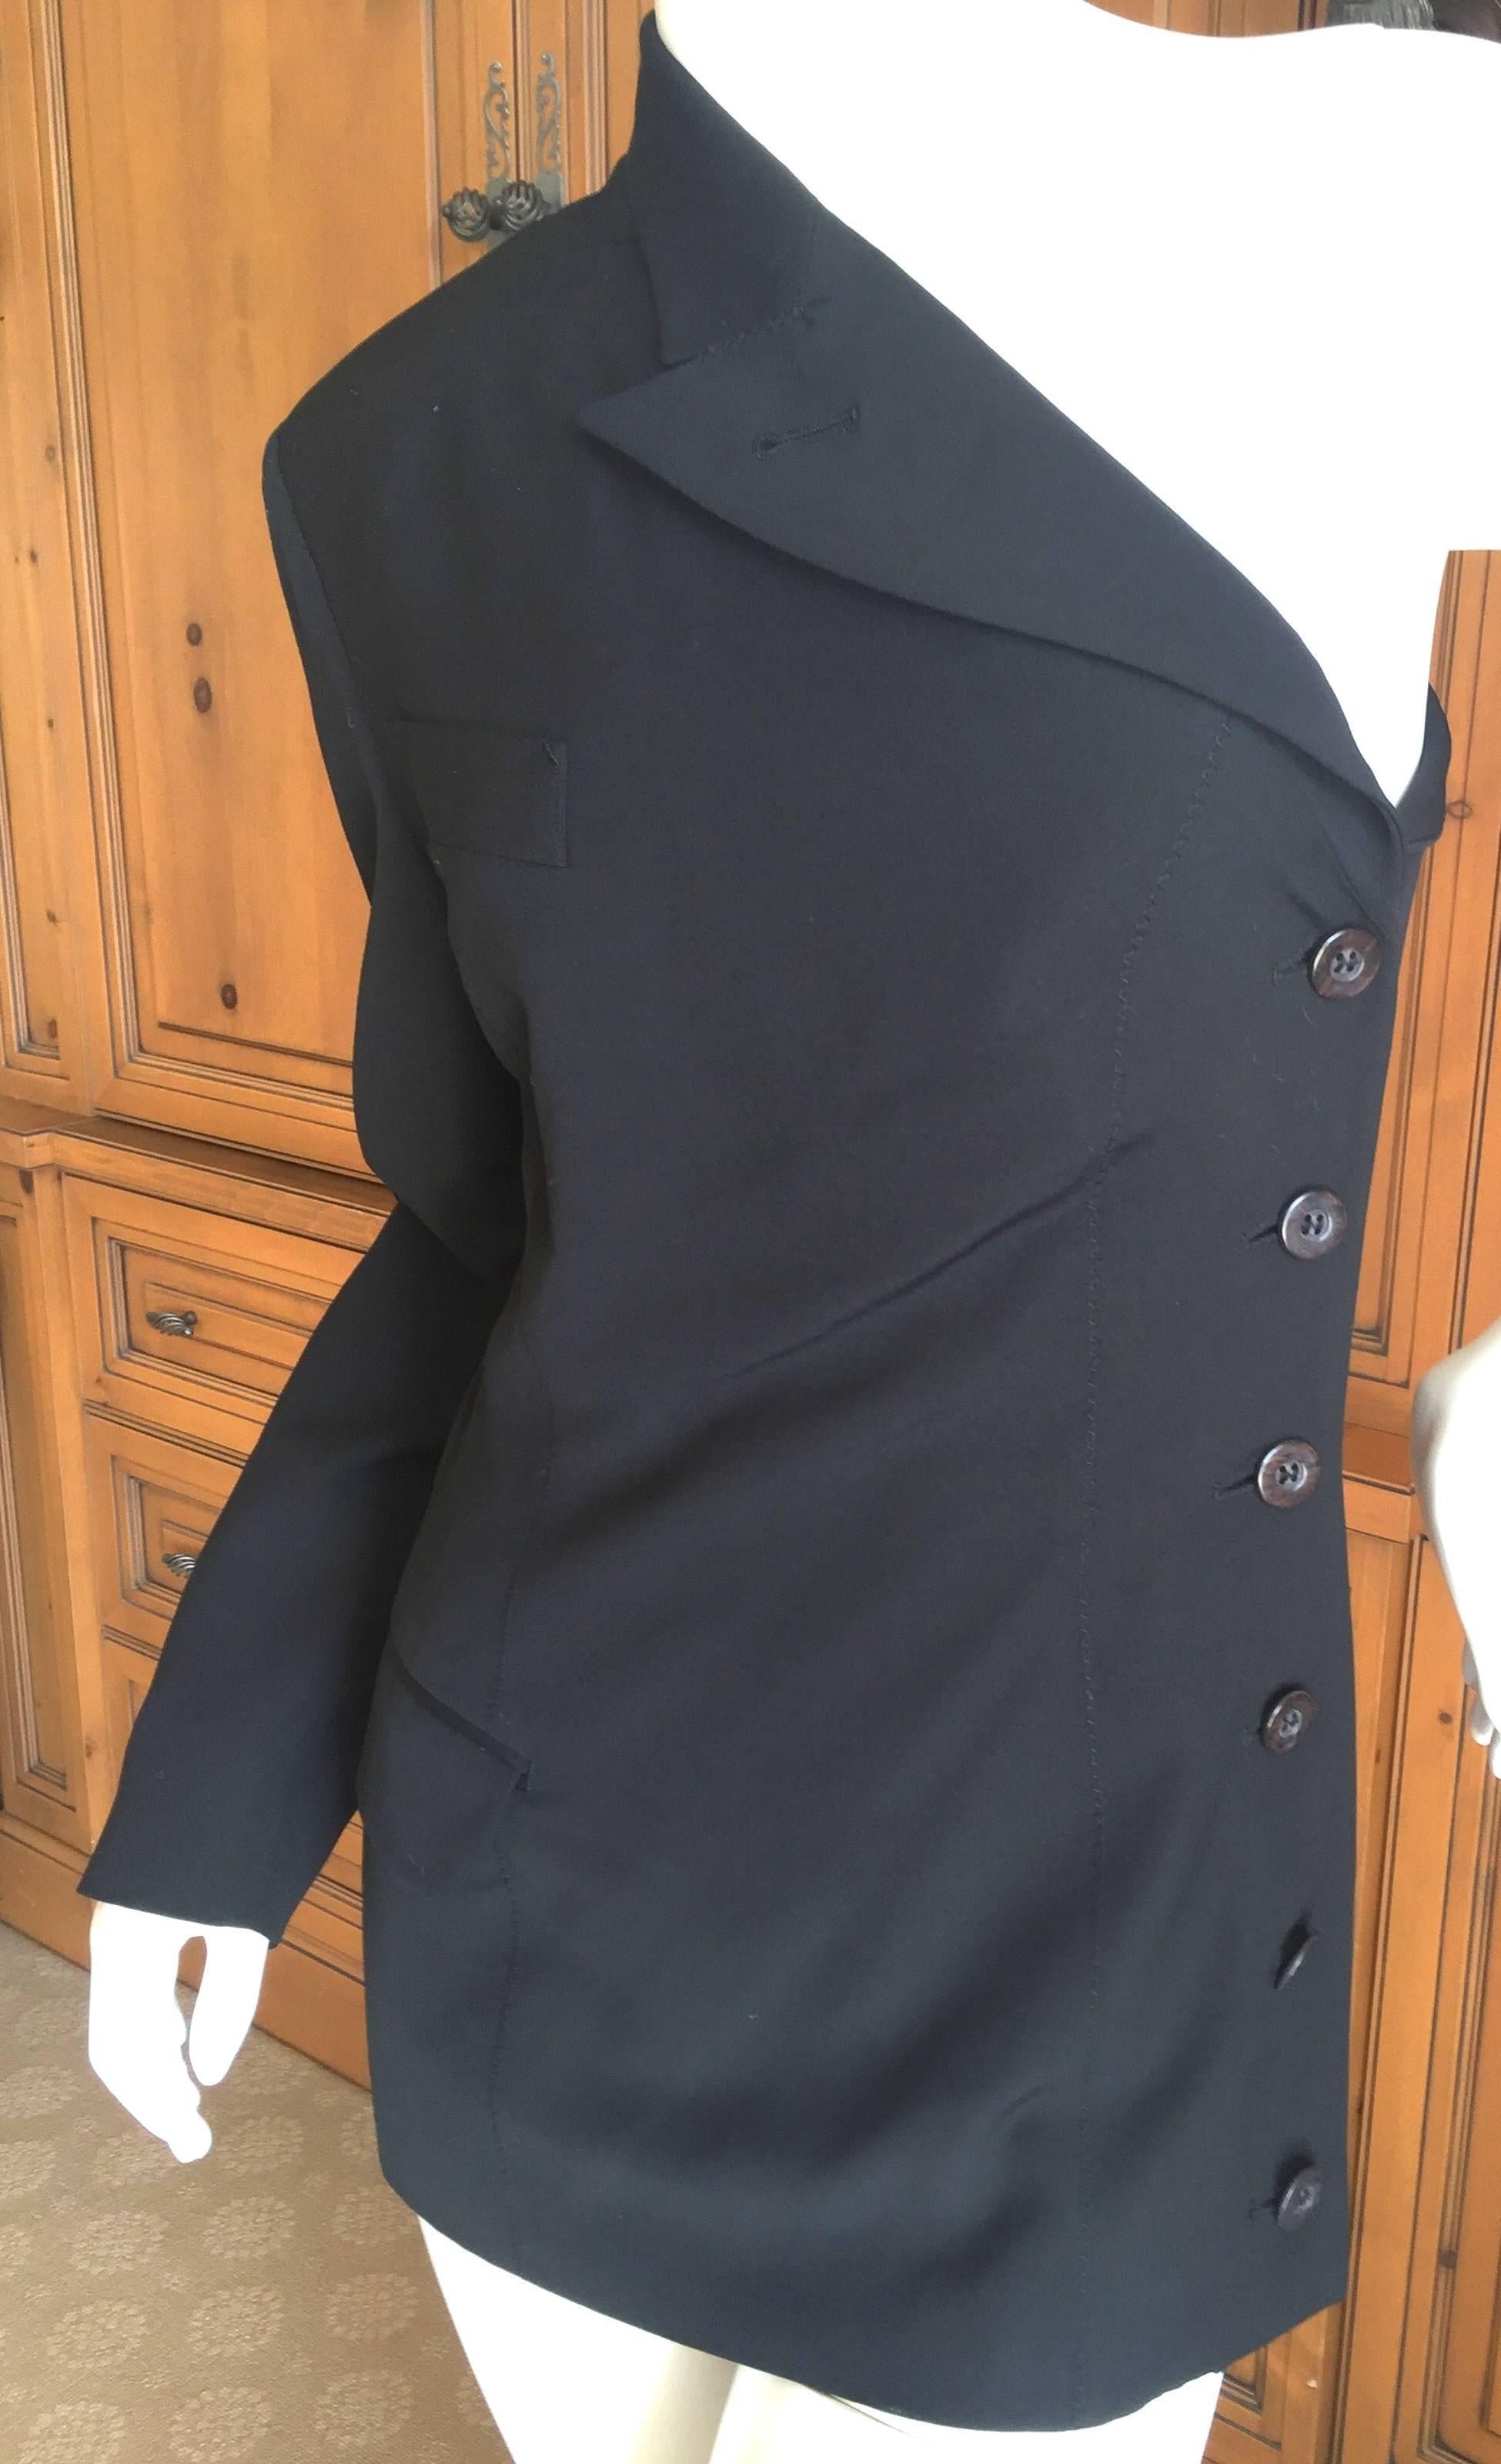 Witty and wonderful one sleeve jacket from Jean Paul Gaultier.
This is a very early version of this, the one sleeve blazer, that Gaultier visited throughout his career .
Bust 36"
Waist 28"
Length 27"